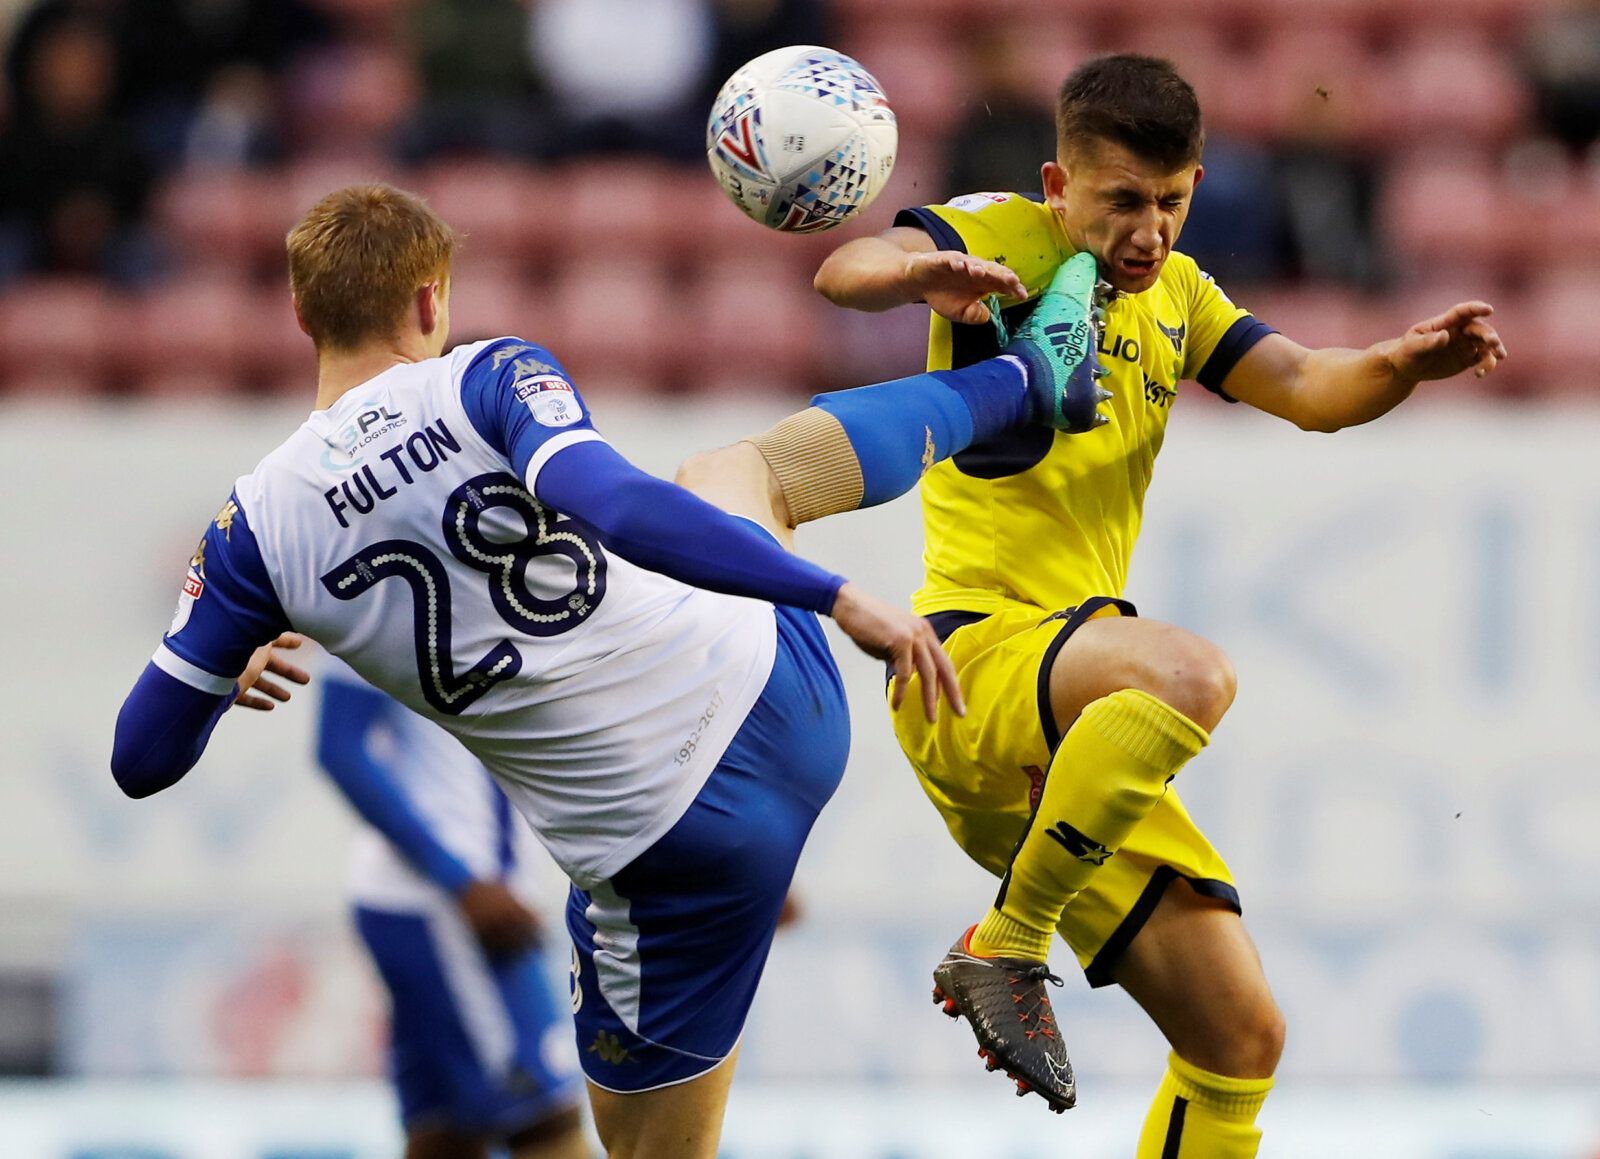 Soccer Football - League One - Wigan Athletic vs Oxford United - DW Stadium, Wigan, Britain - April 17, 2018   Oxford United's Cameron Brannagan in action with Wigan Athletic's Jay Fulton   Action Images/Lee Smith    EDITORIAL USE ONLY. No use with unauthorized audio, video, data, fixture lists, club/league logos or 